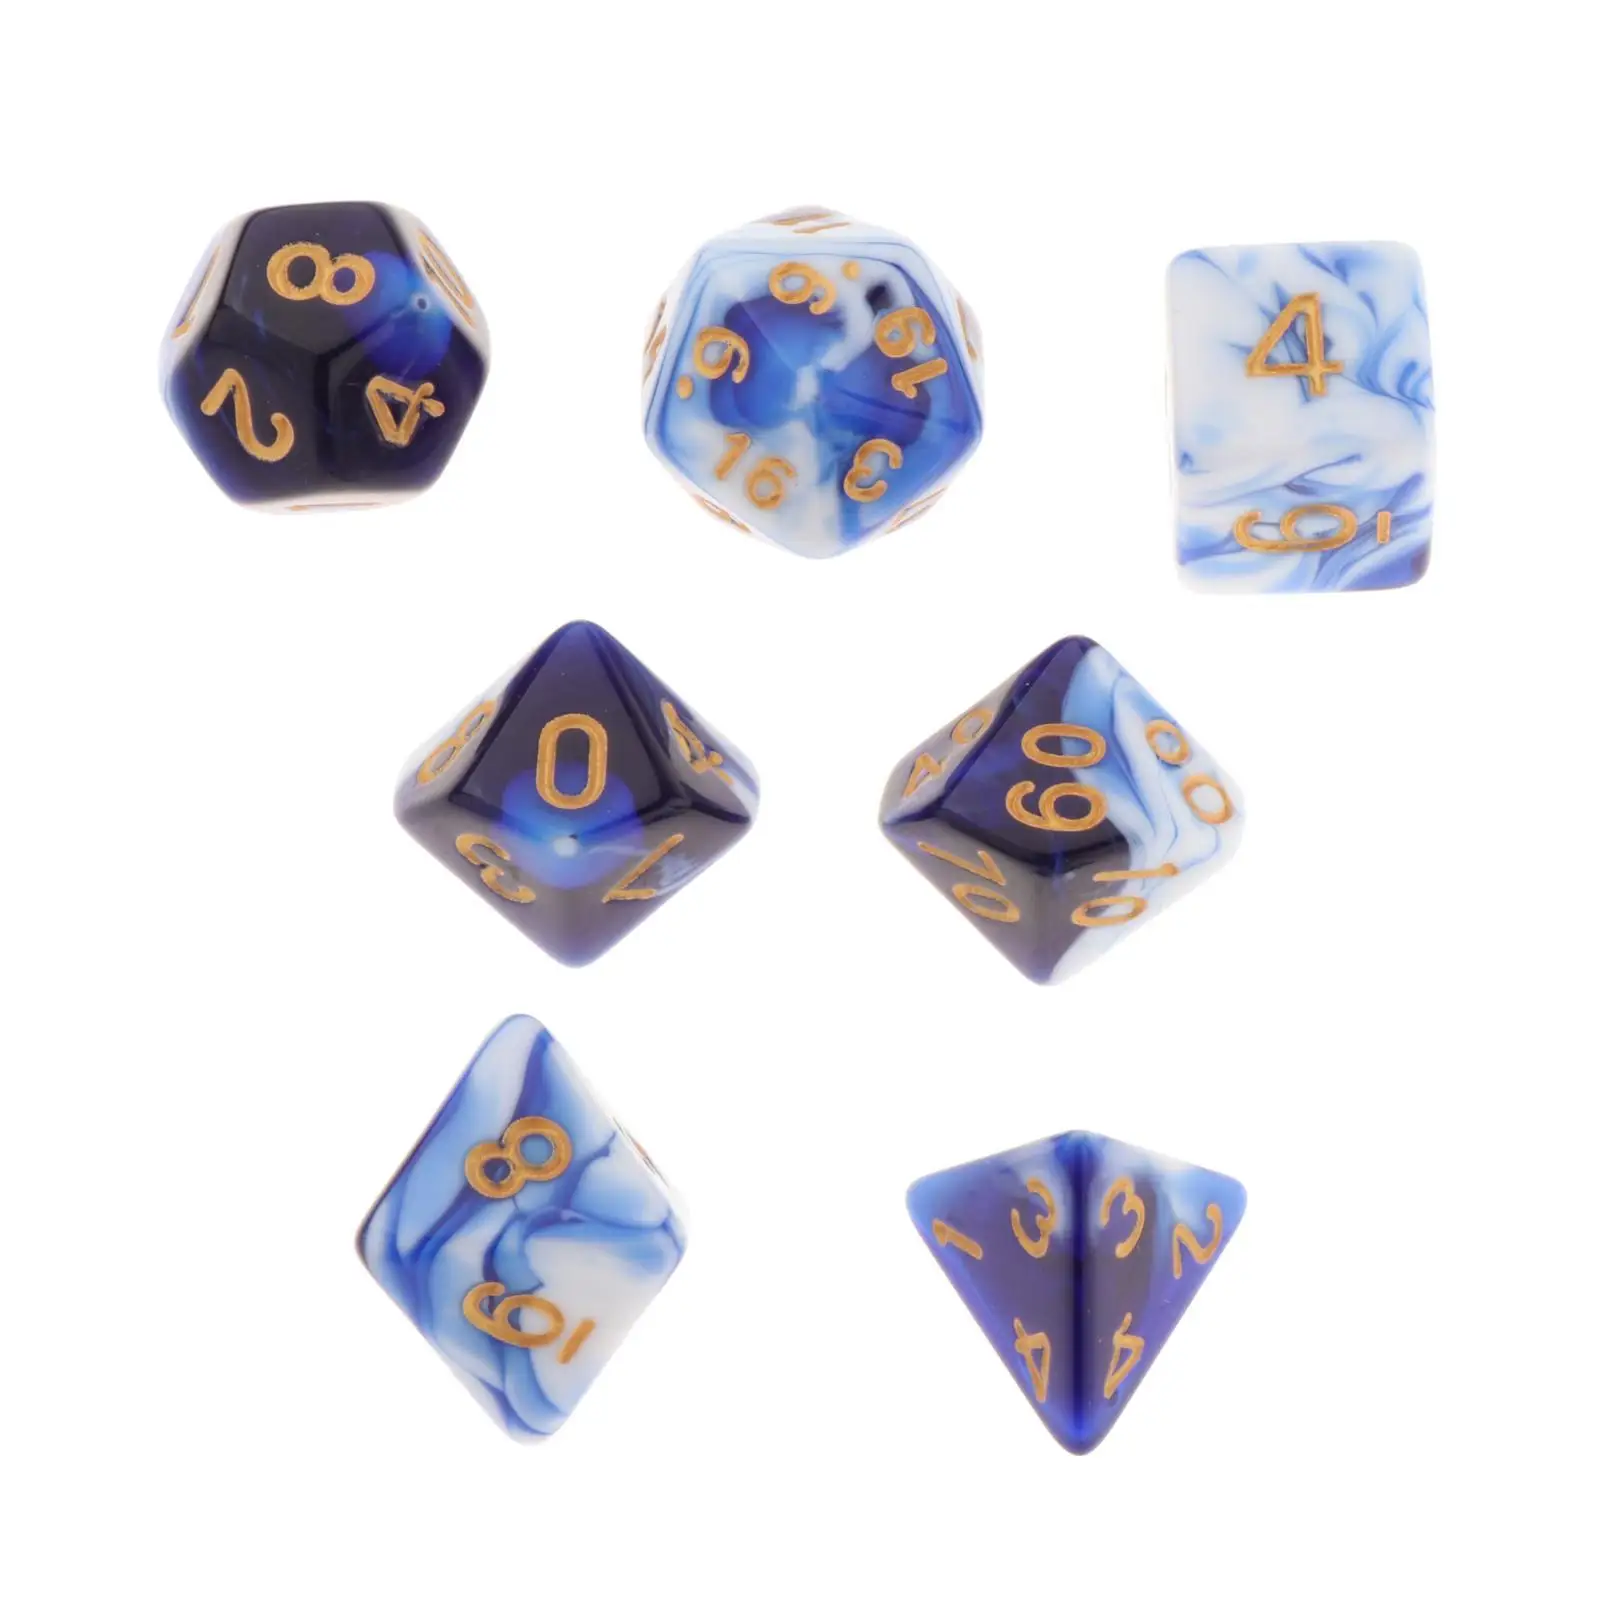 7x Polyhedral Dice Board Games Table Games Party Favors for Dnd Rpg Mtg